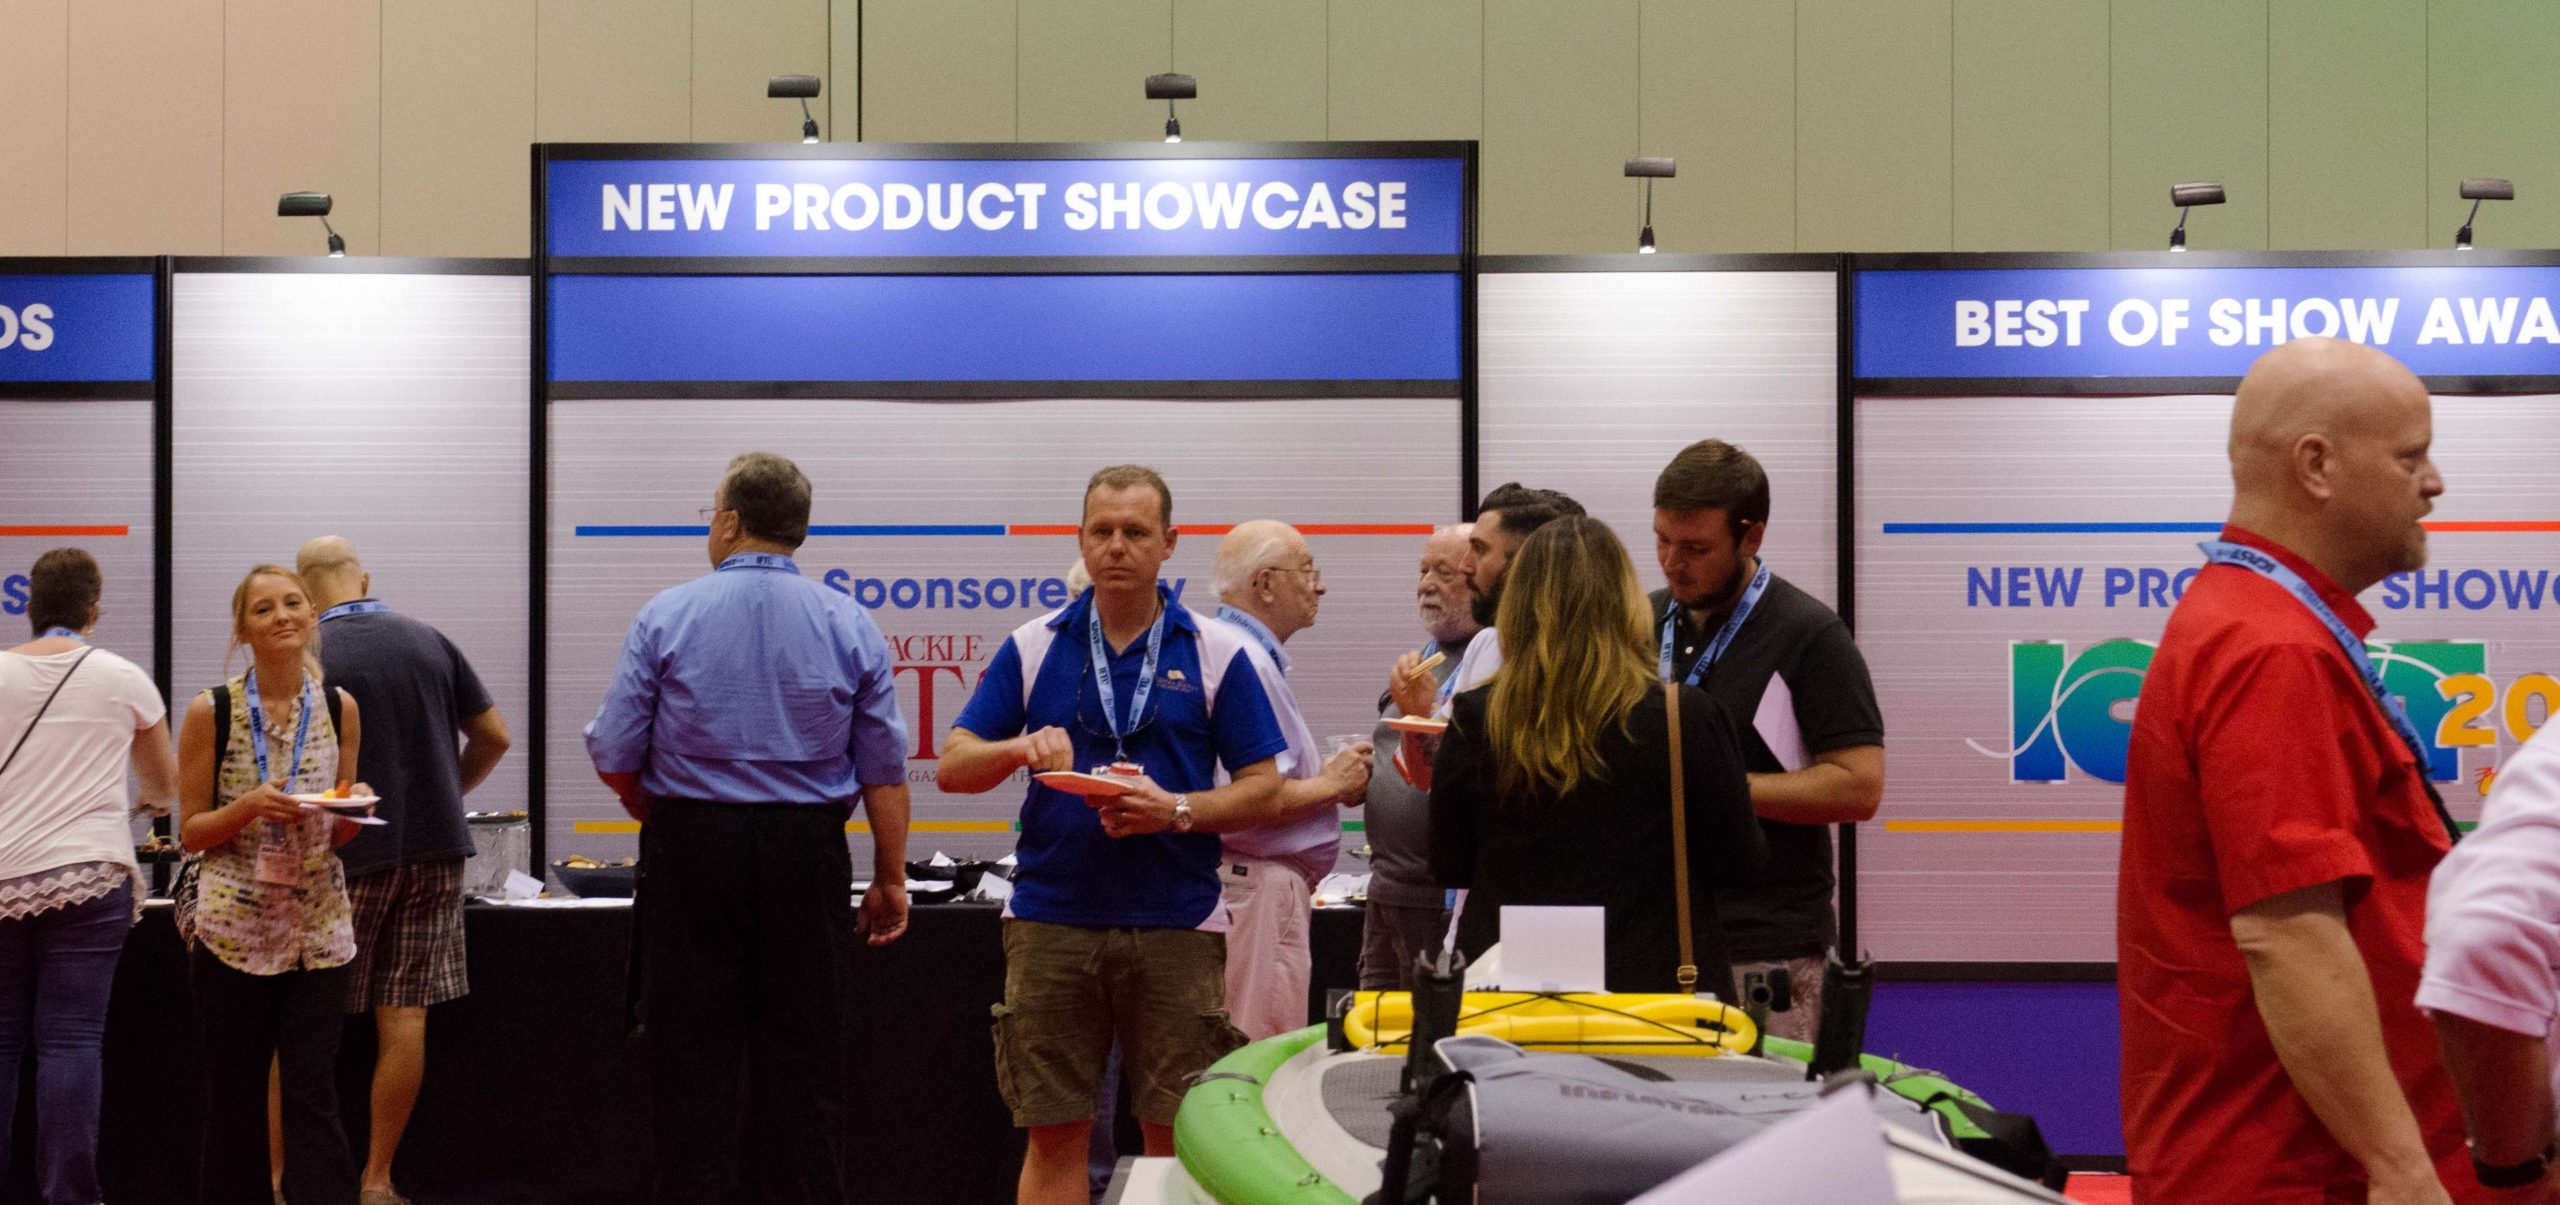 The ICAST 2015 festivities in the Orange County Convention Center kick off with the annual New Product Showcase. Manufacturers show off their latest products in hopes of catching the eye of buyers and the media.